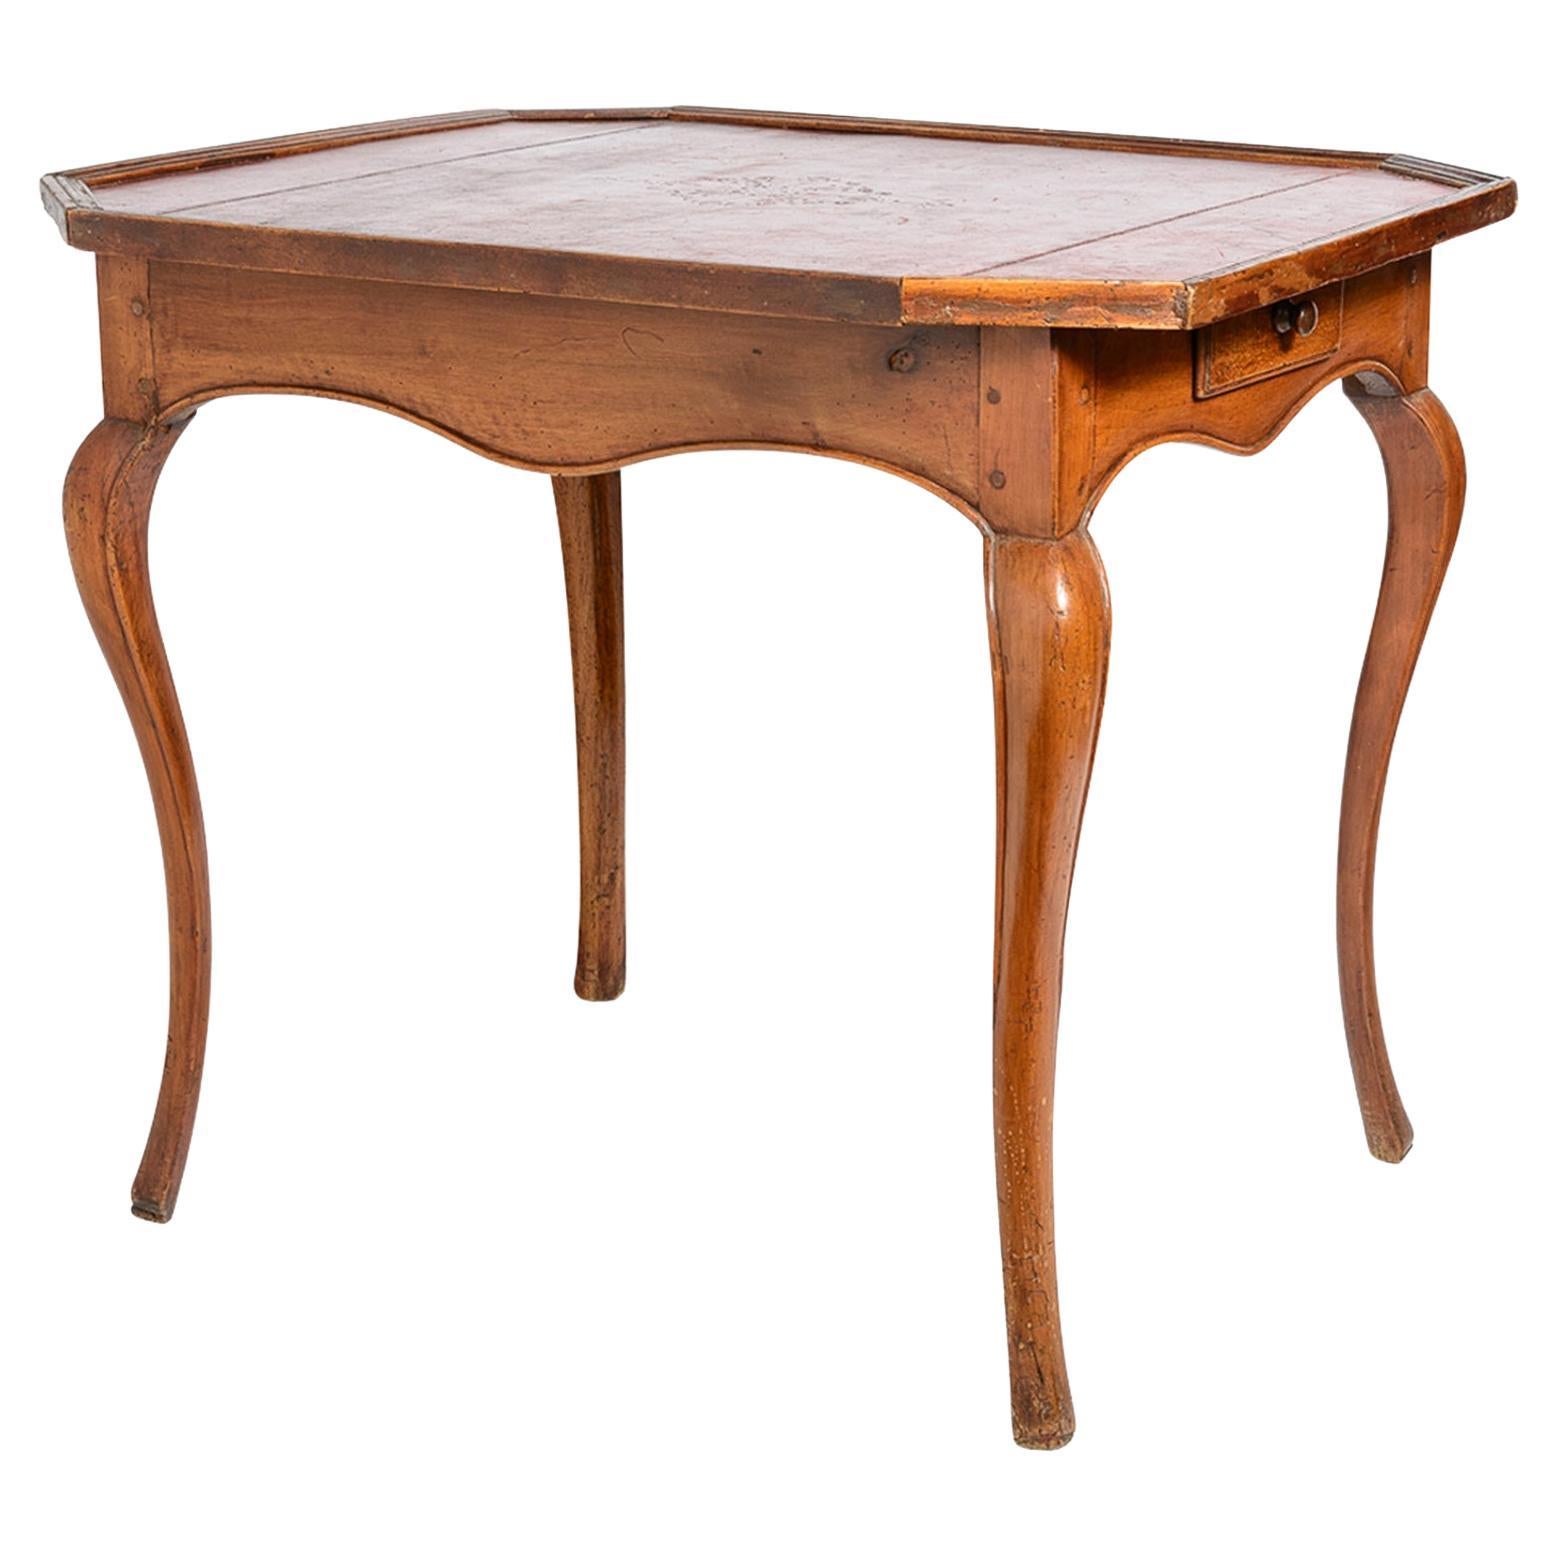 French Louis XV Period Game Table With Original Red Leather Top, 18th C.